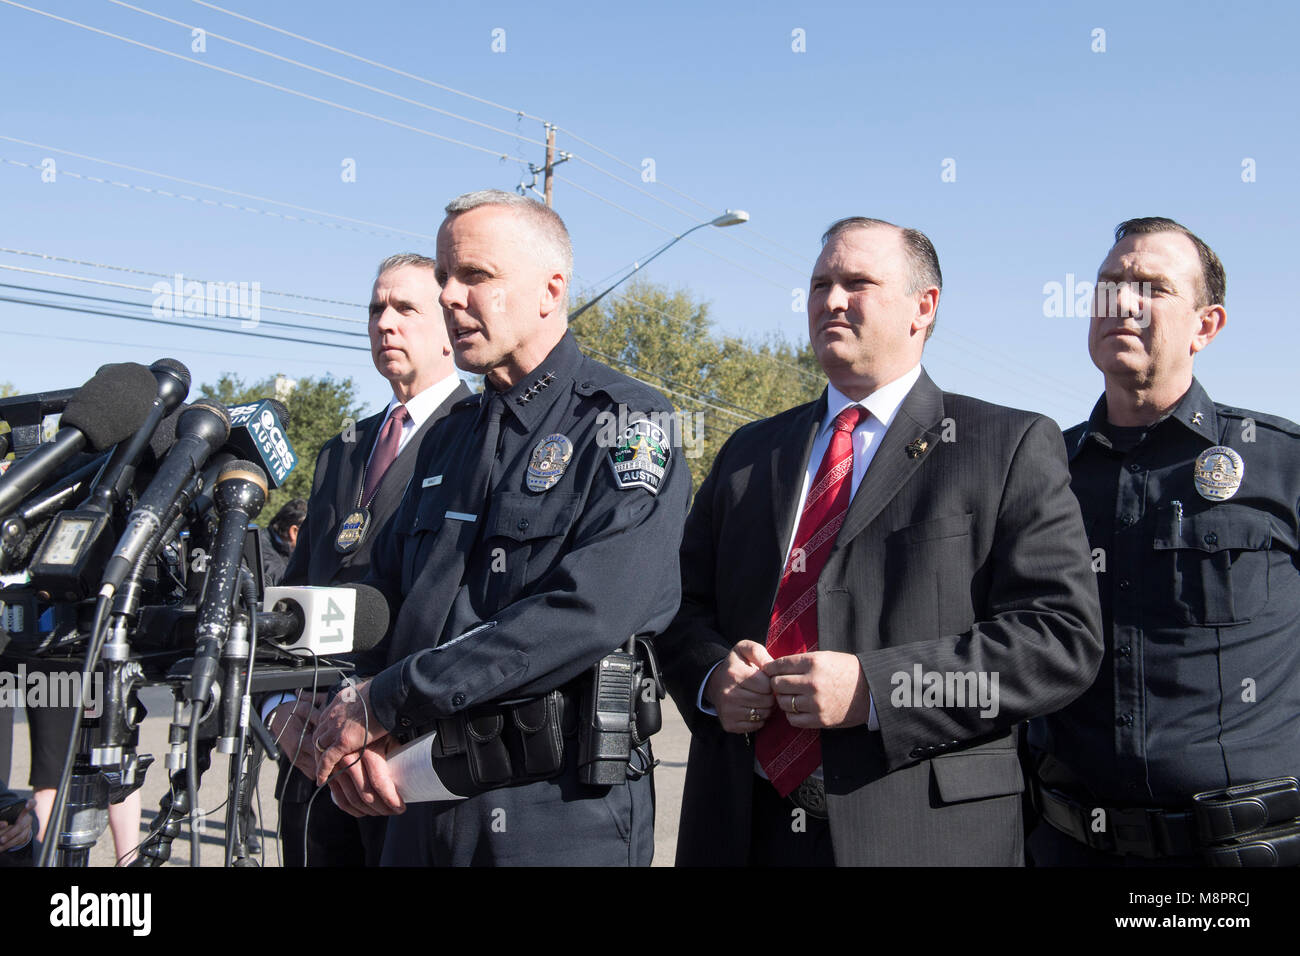 Austin, Texas, Interim Police Chief Brian Manley, FBI Special Agent Christopher Combs (r) and ATF chief Fred Milanowski speak to press as they work at the crime scene where a fourth package bomb in three weeks exploded Sunday night on a southwest Austin roadside, injuring two men. Police say a possible 'trip wire' was used to detonate the device. Stock Photo